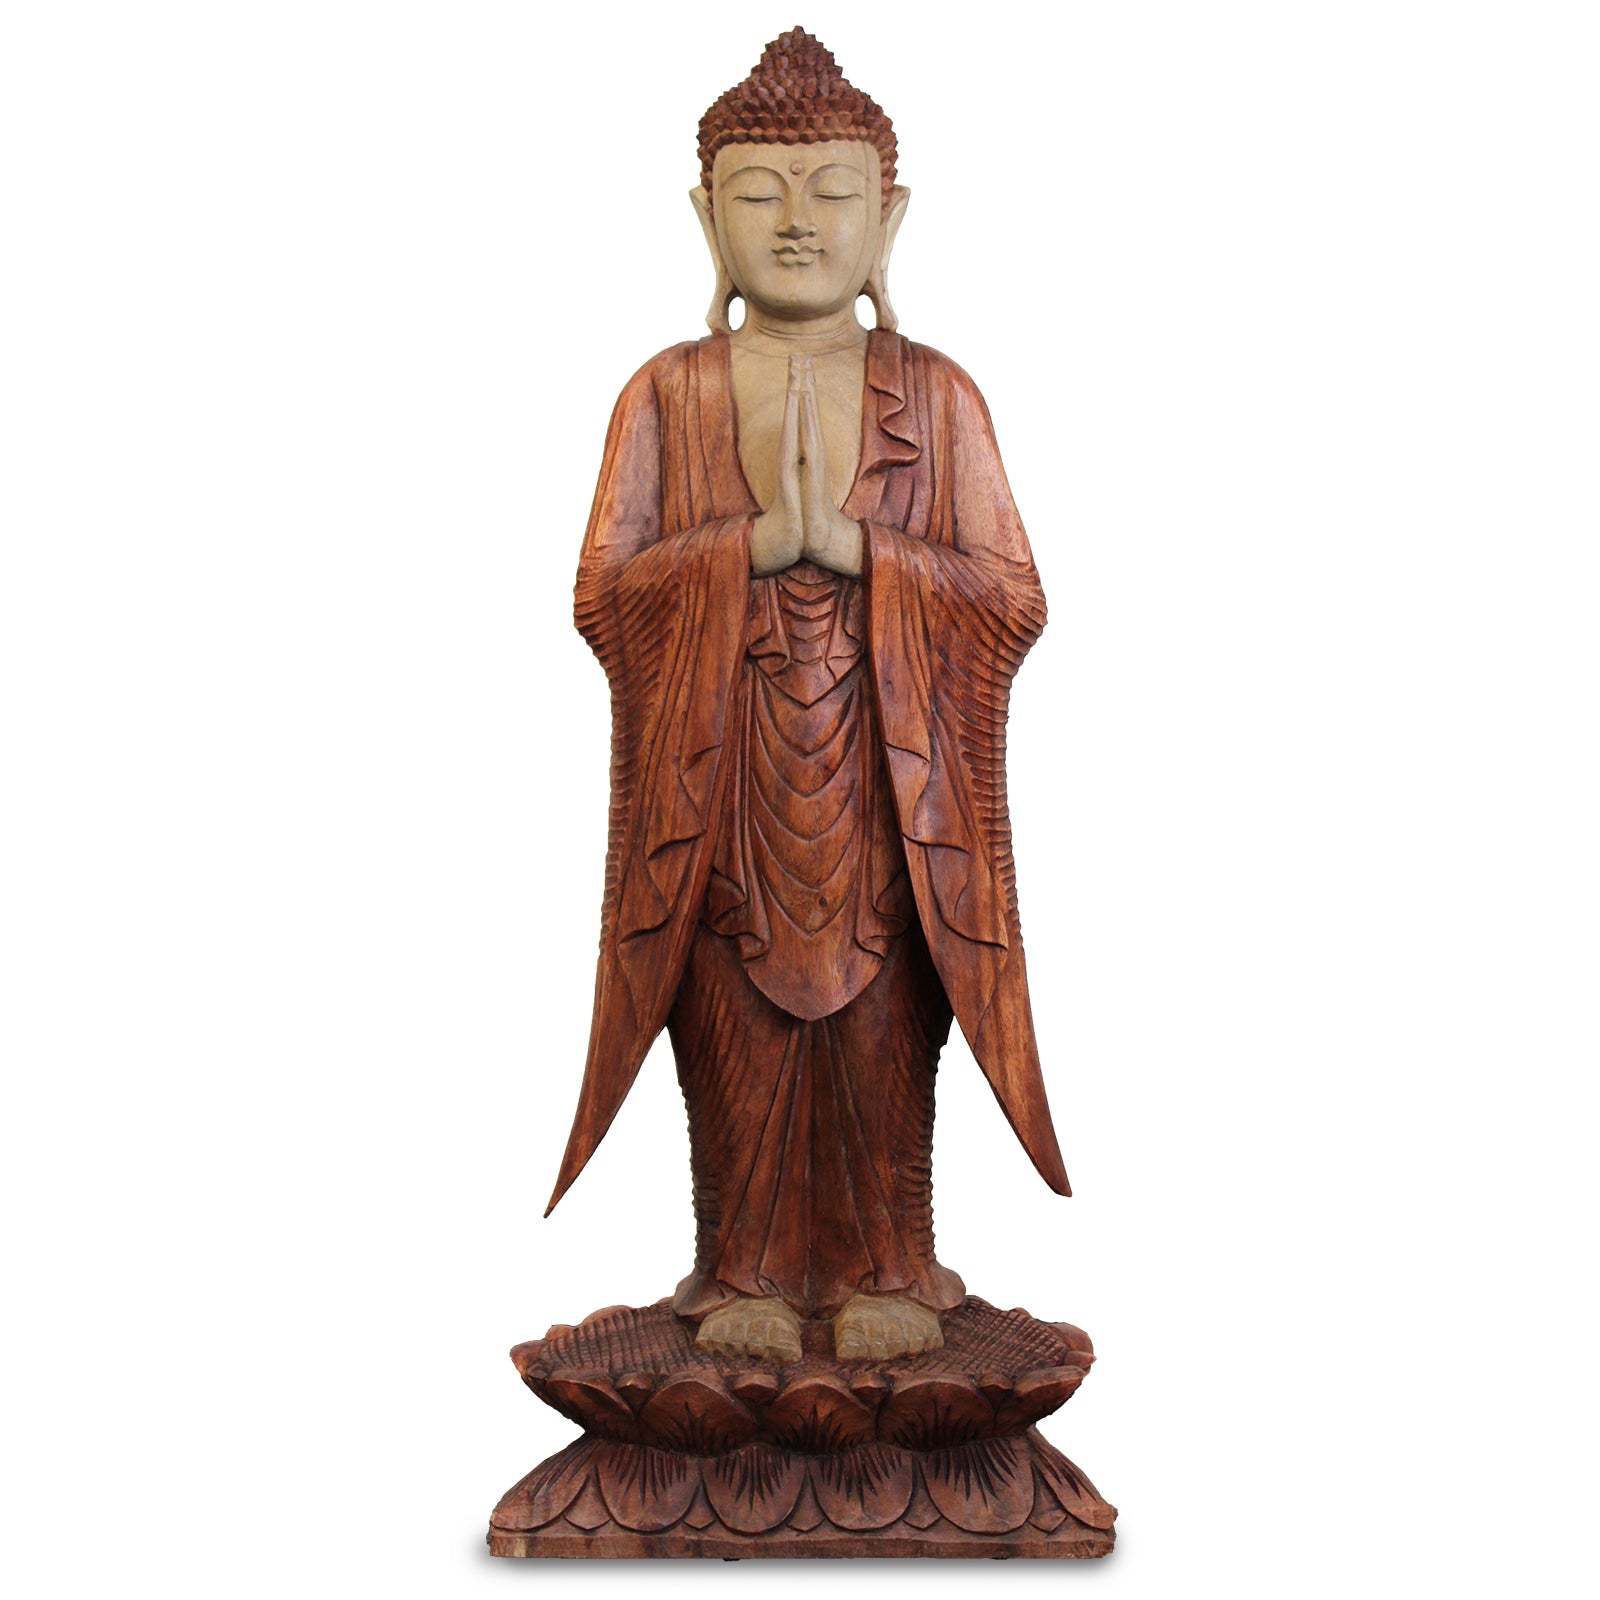 View Buddha Statue Standing 1m Welcome information